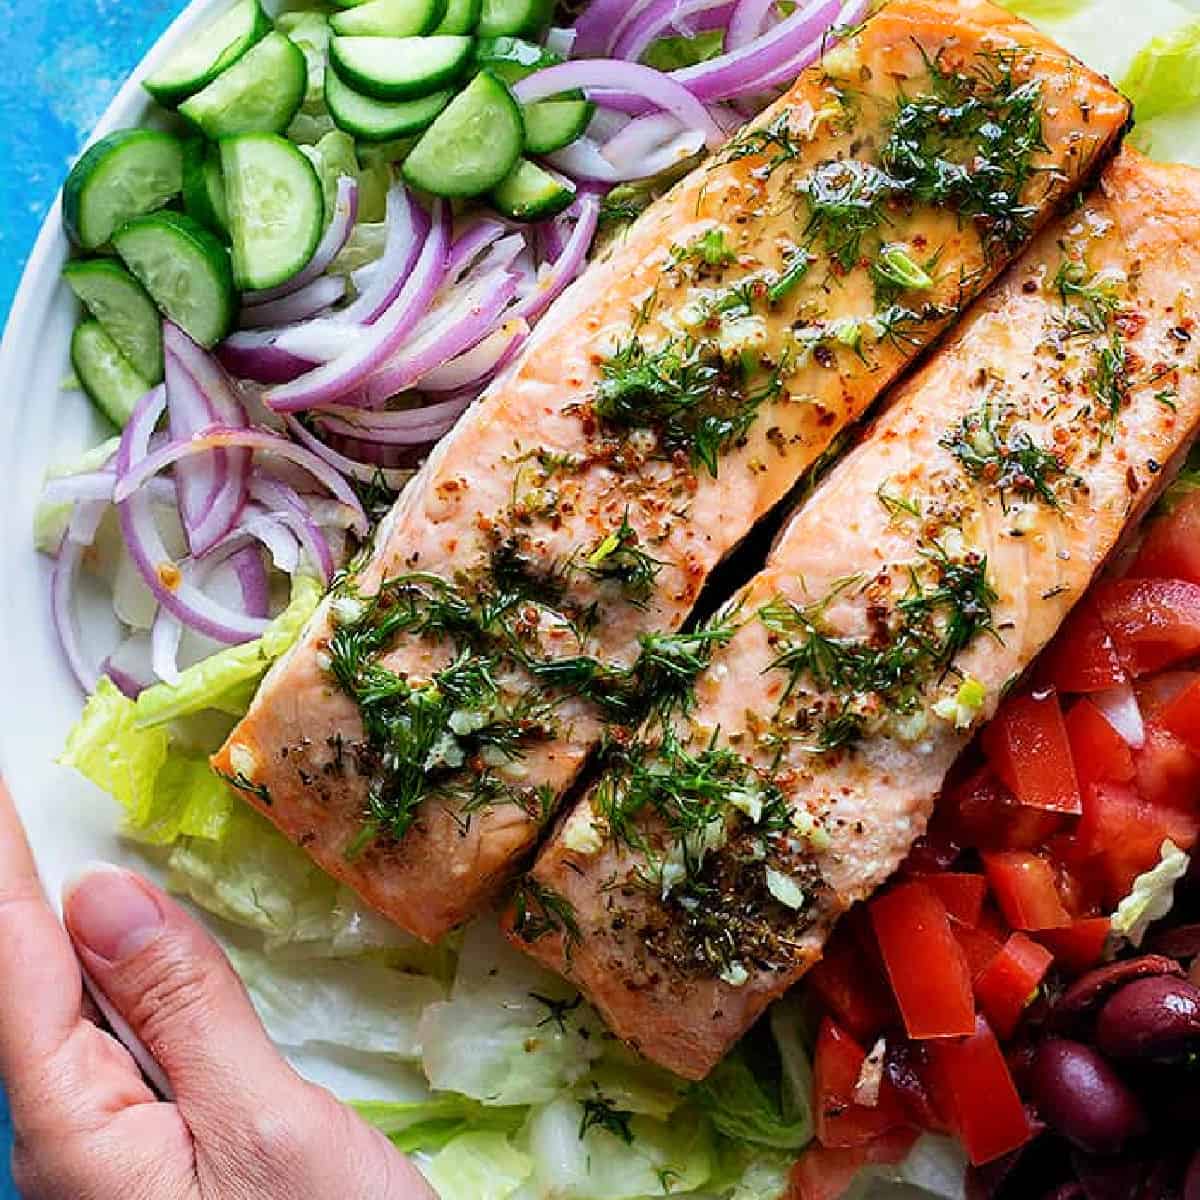 Ready in 30 minutes, this salmon salad is perfect for lunch or dinner. You only need a few ingredients and some good salmon to make it!